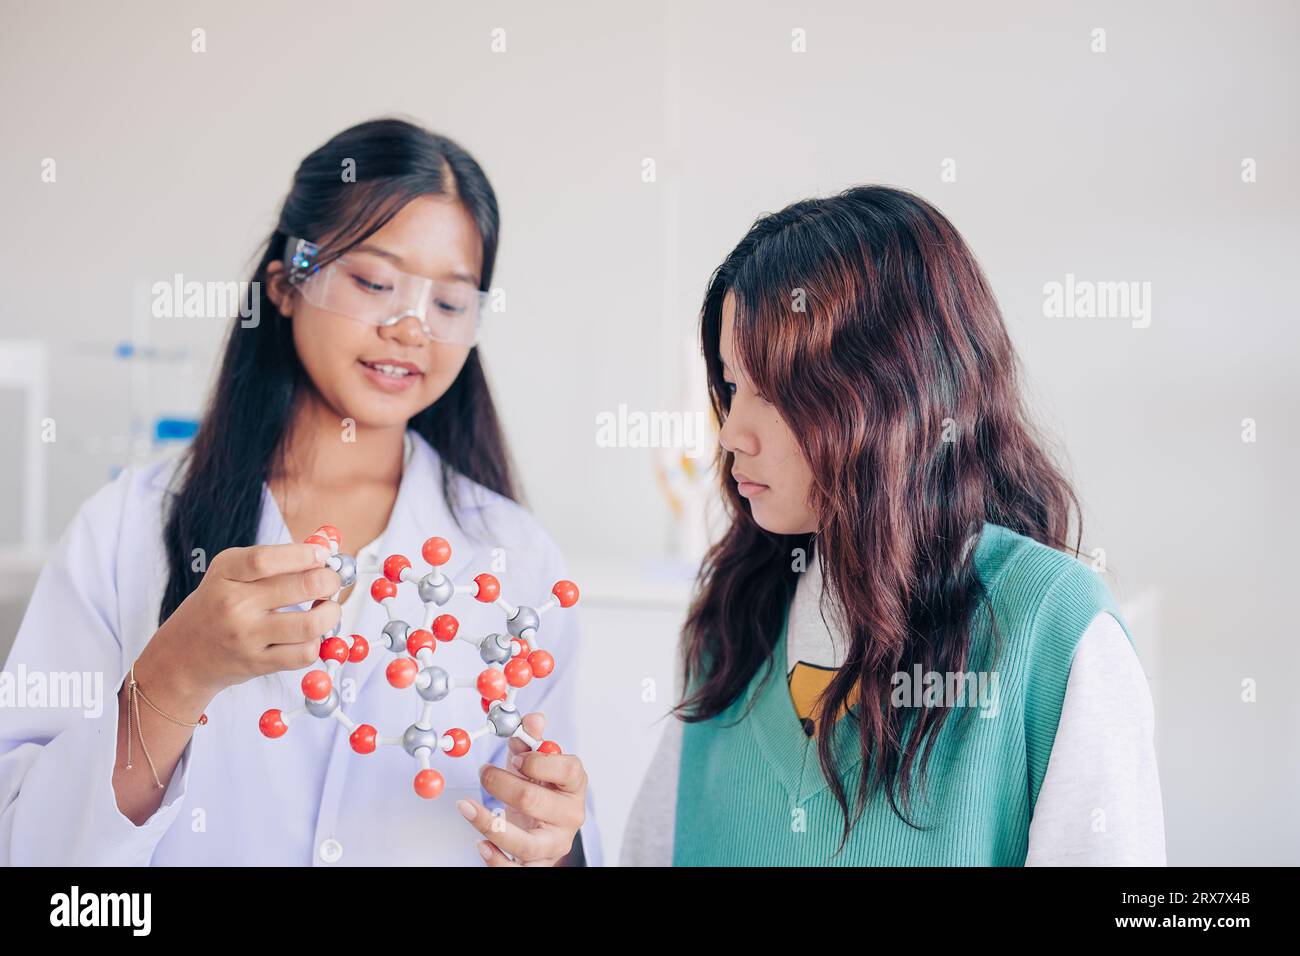 Children teen role playing scientist at fun science chemical lab workshop for learning education in school Stock Photo